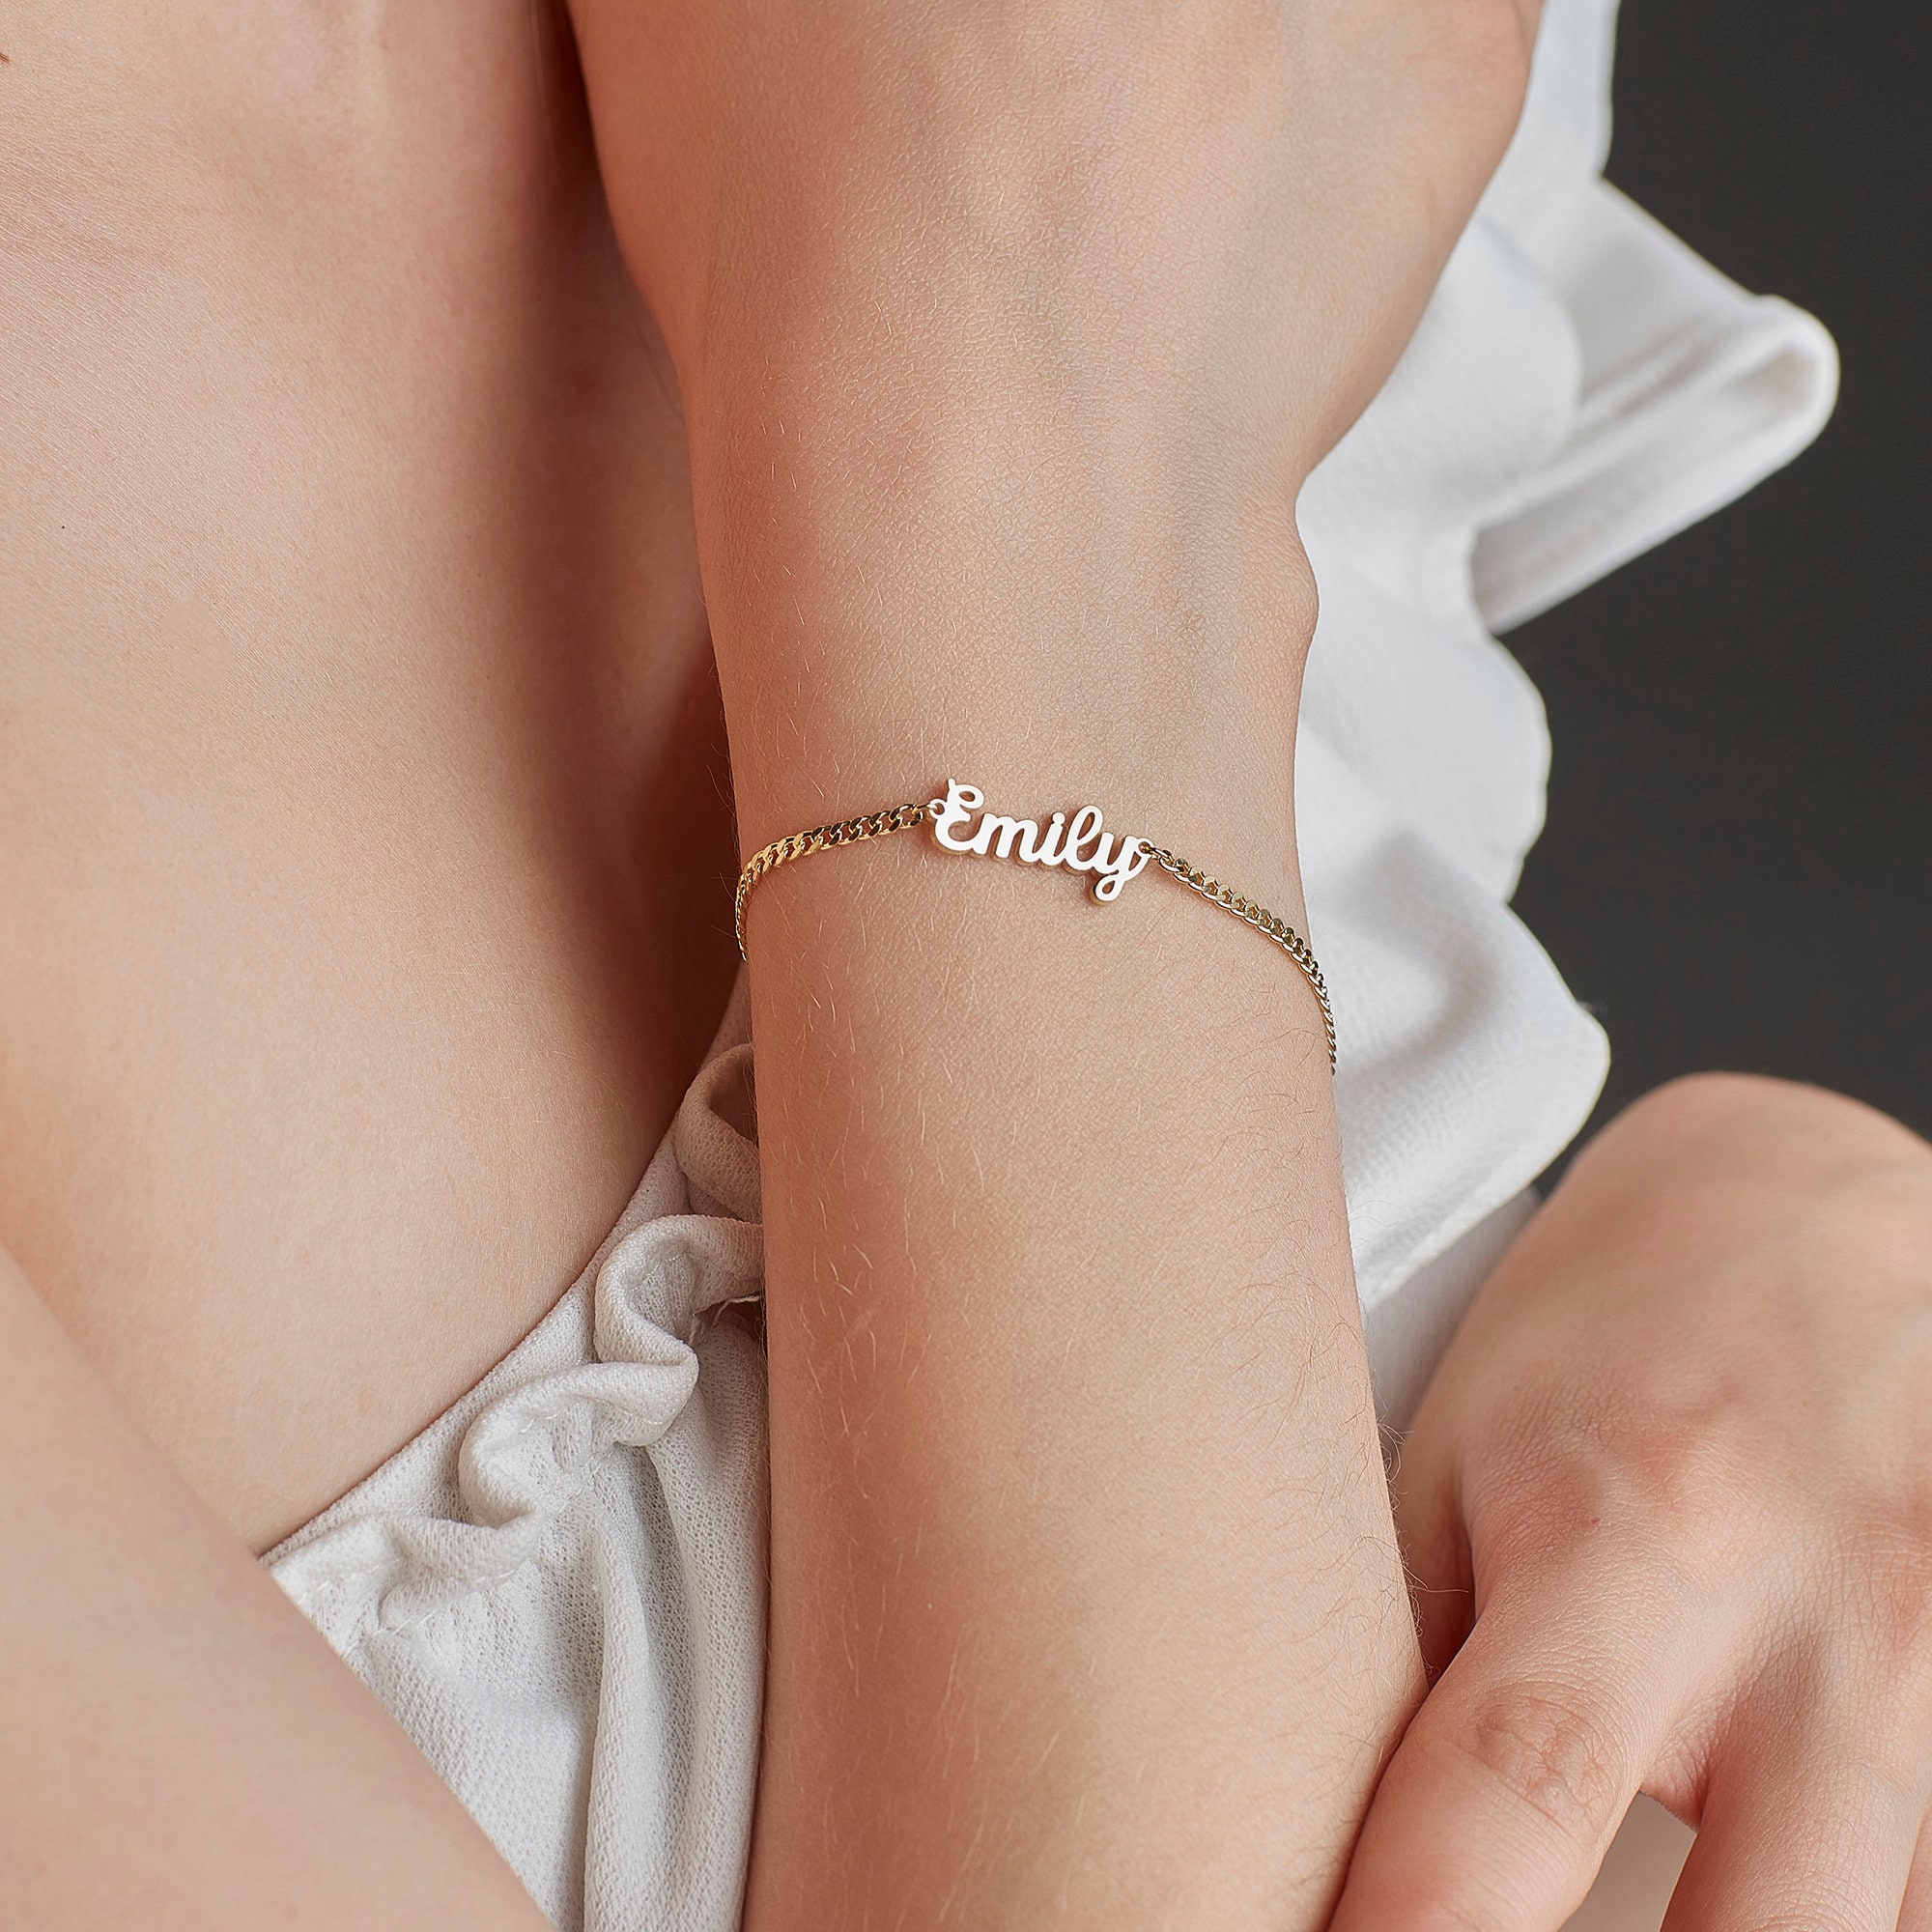 Personalized Wear-A-Name Bracelet – Misty and Molly